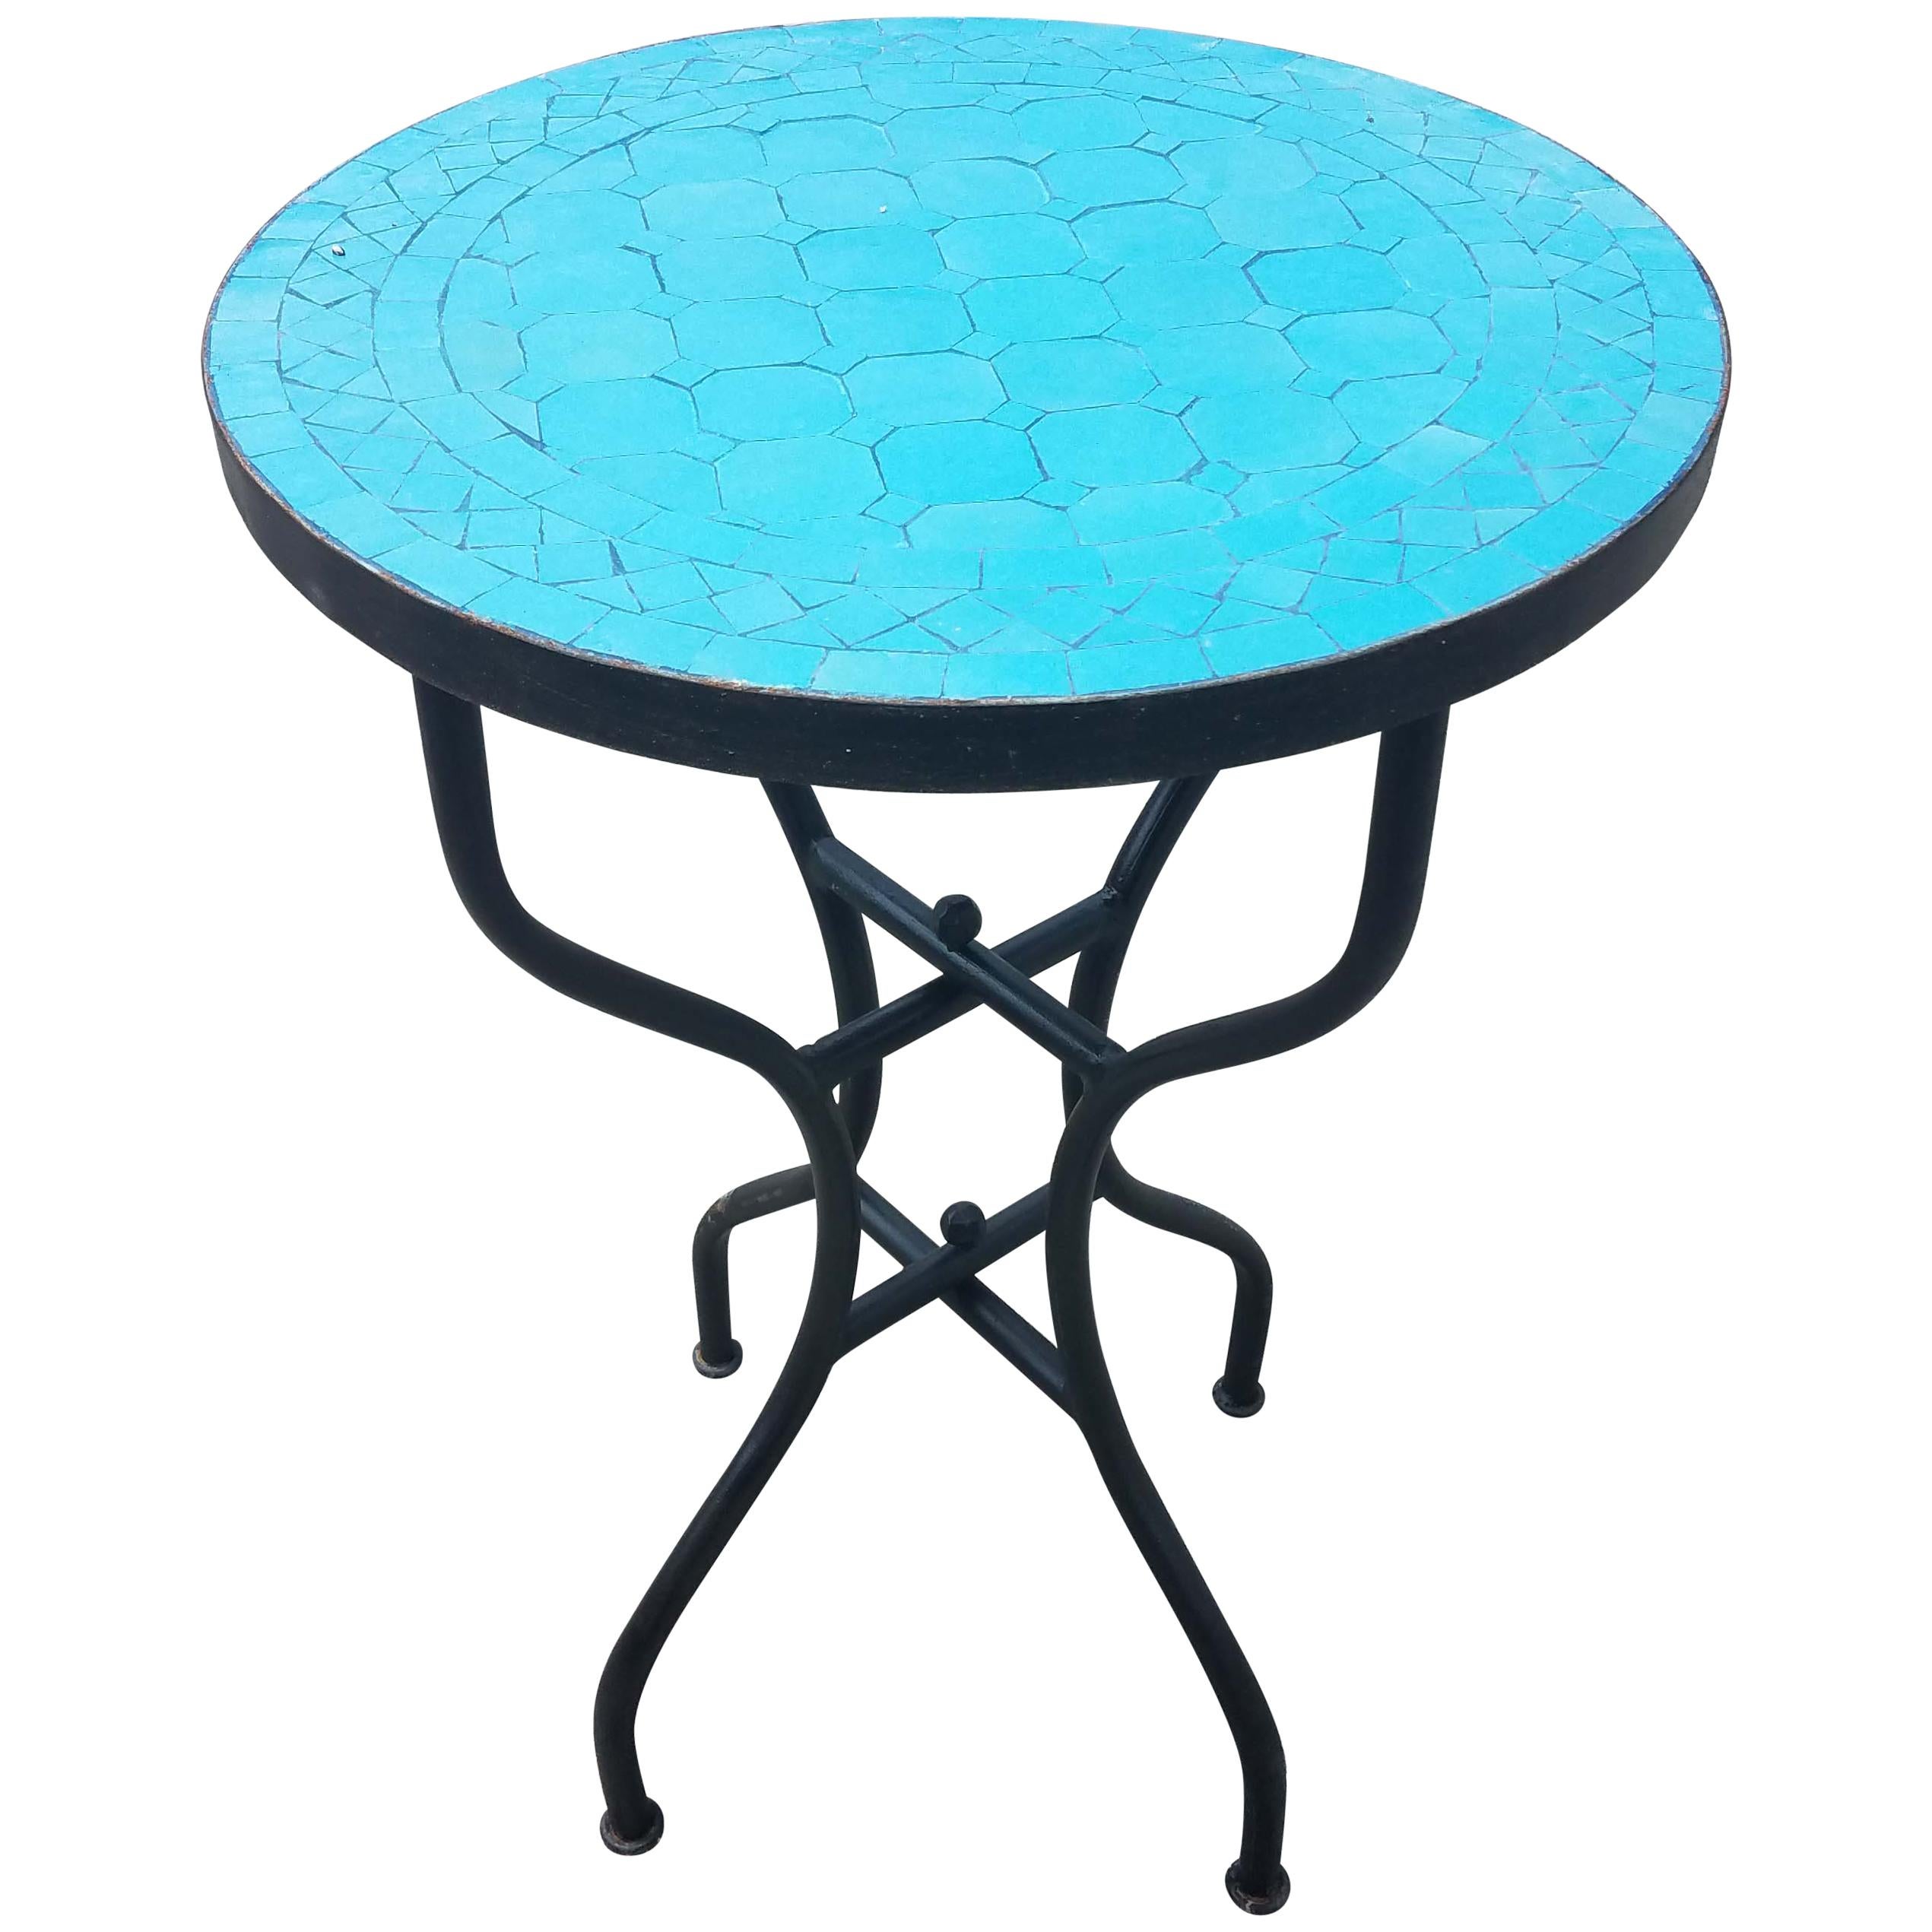 All Turquoise Moroccan Mosaic Table, CR4 For Sale